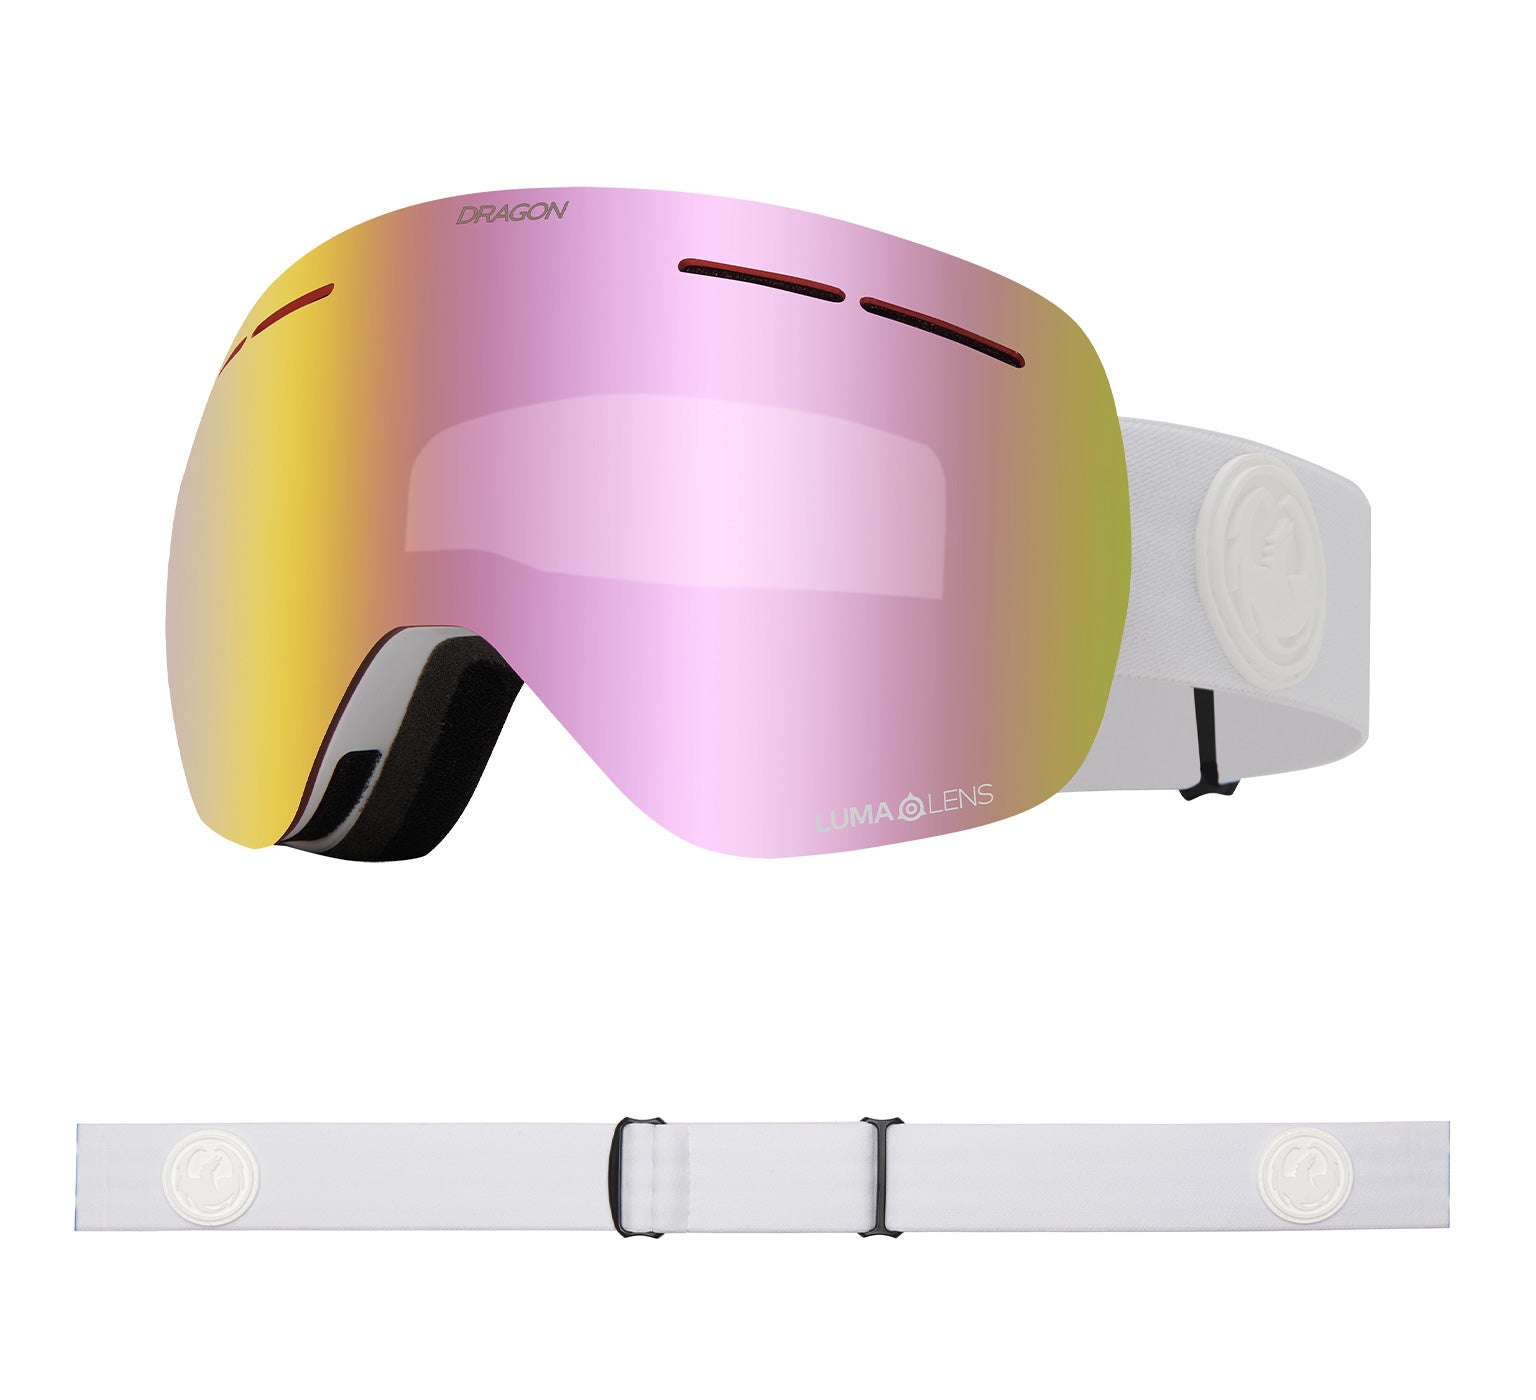 X1s - Whiteout with Lumalens Pink Ionized Lens